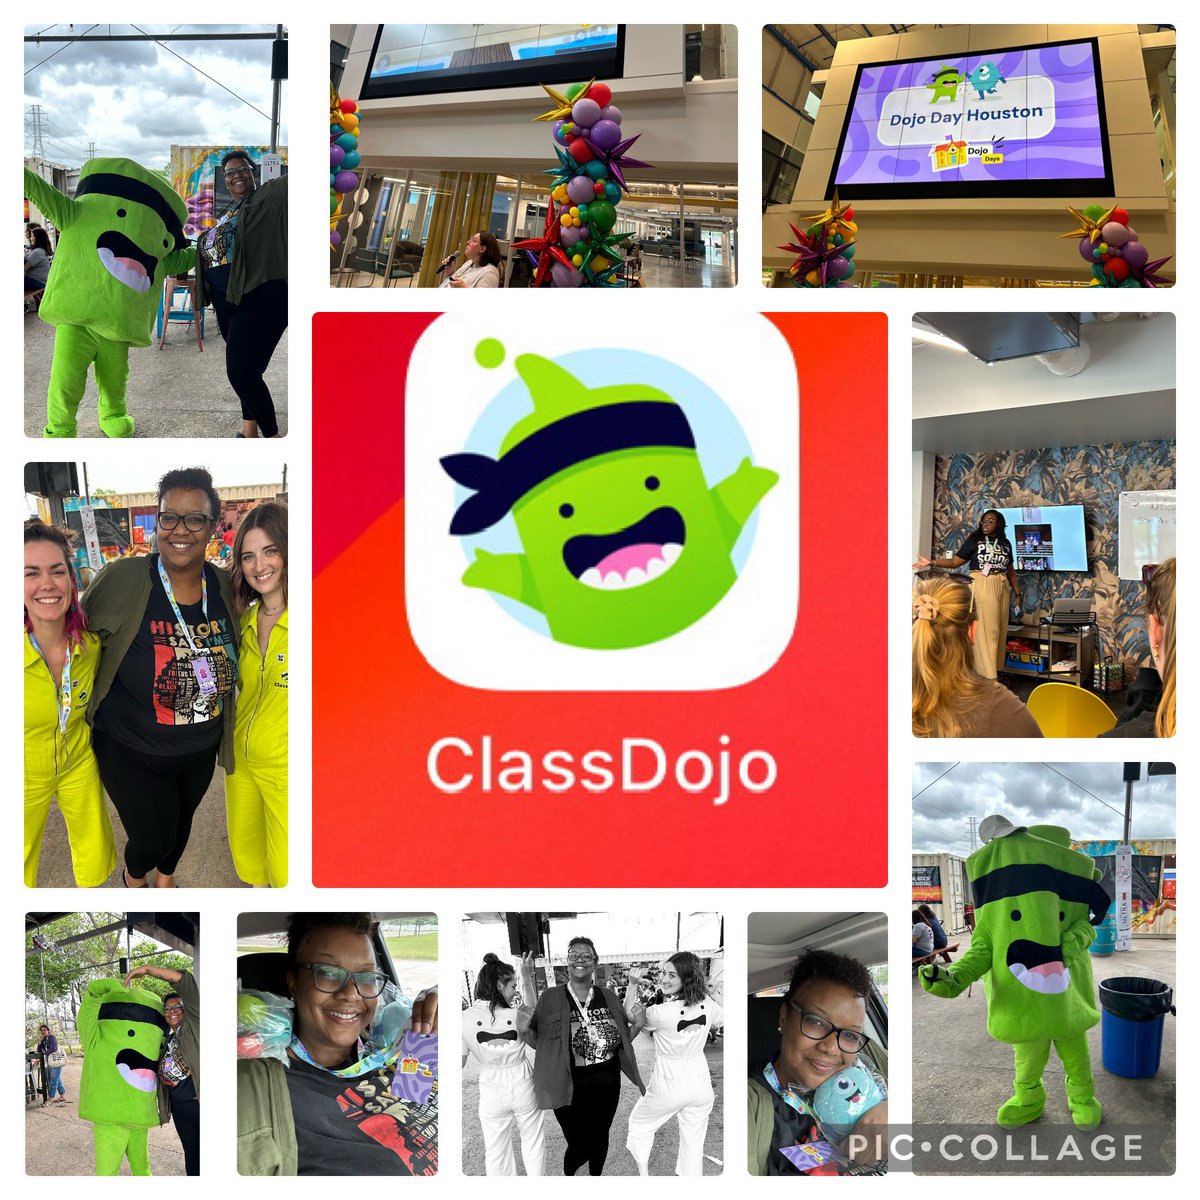 It was so much fun today with @ClassDojo Houston! Awesome speakers and great networking! And the Dojo team was tons of fun! Thank you for the invite, food, and swag! Looking forward to the next one and becoming a Dojo mentor, tutor, and ambassador! #DojodayHouston #DojoHouston